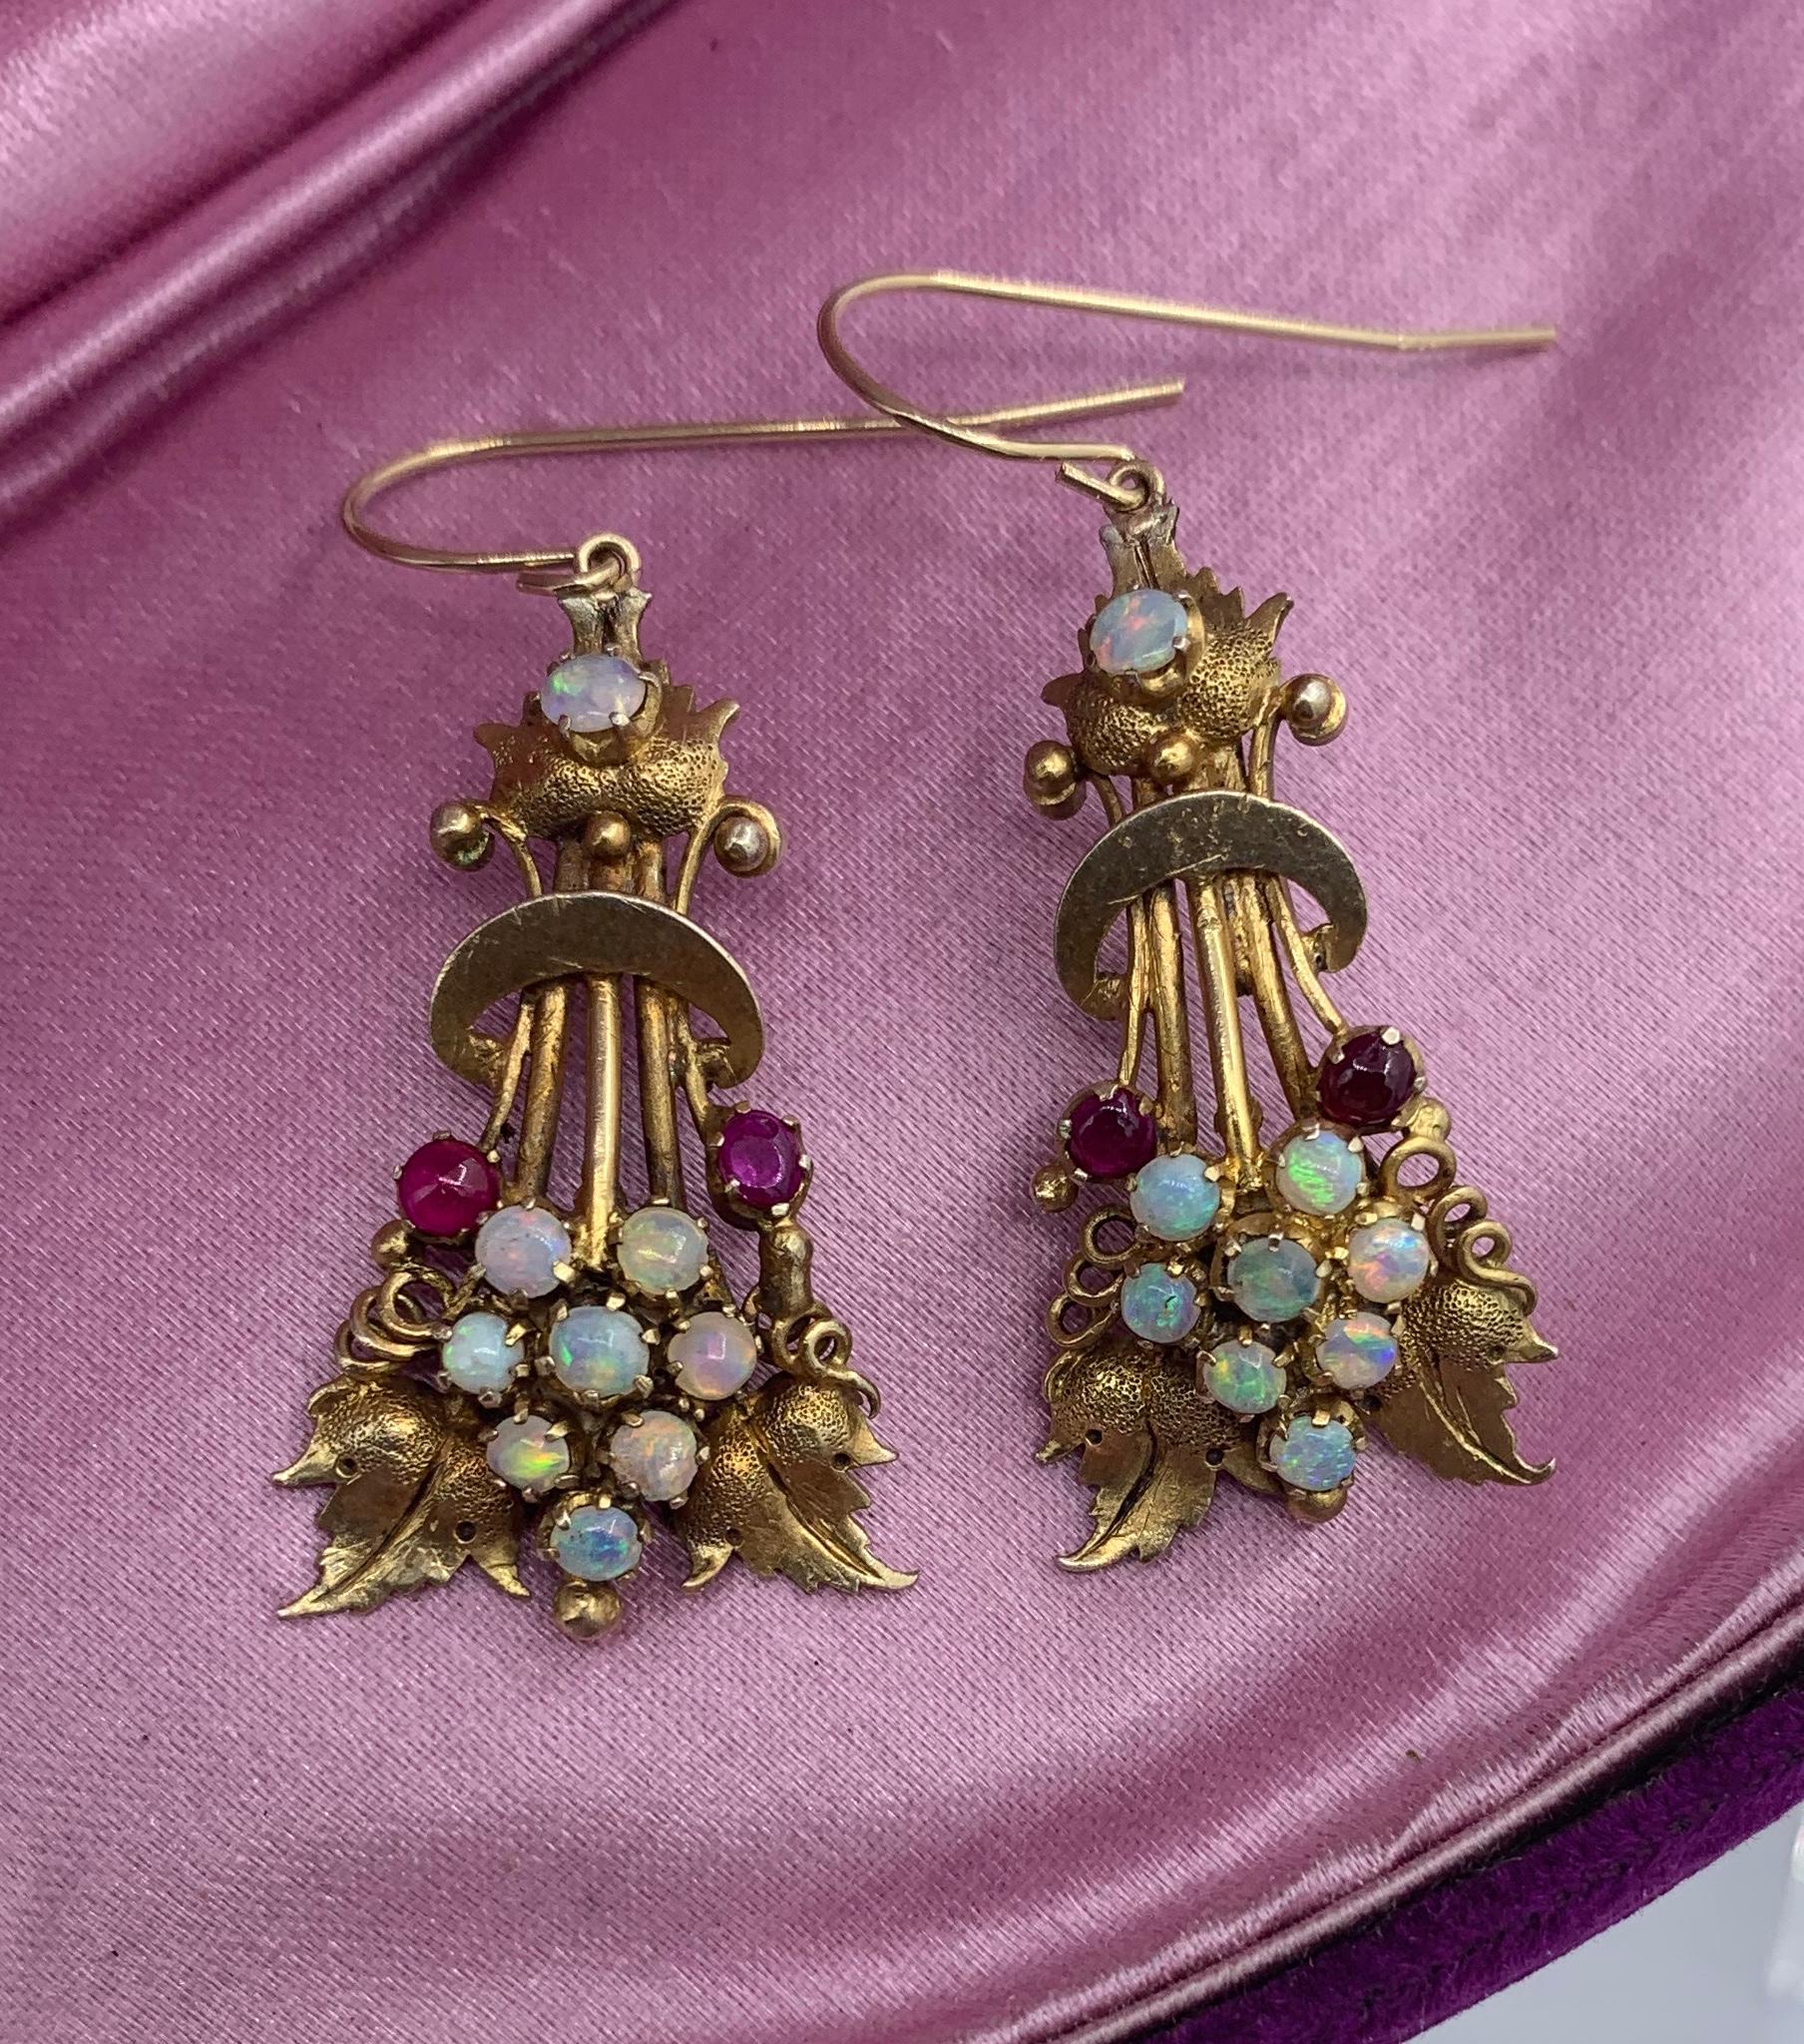 A spectacular pair of Opal and Ruby early Antique Etruscan Revival Victorian leaf motif Pendant Dangle Drop Earrings in 14 Karat Gold.   These antique earrings are of the highest quality.  They have extraordinary neoclassical Etruscan design of a